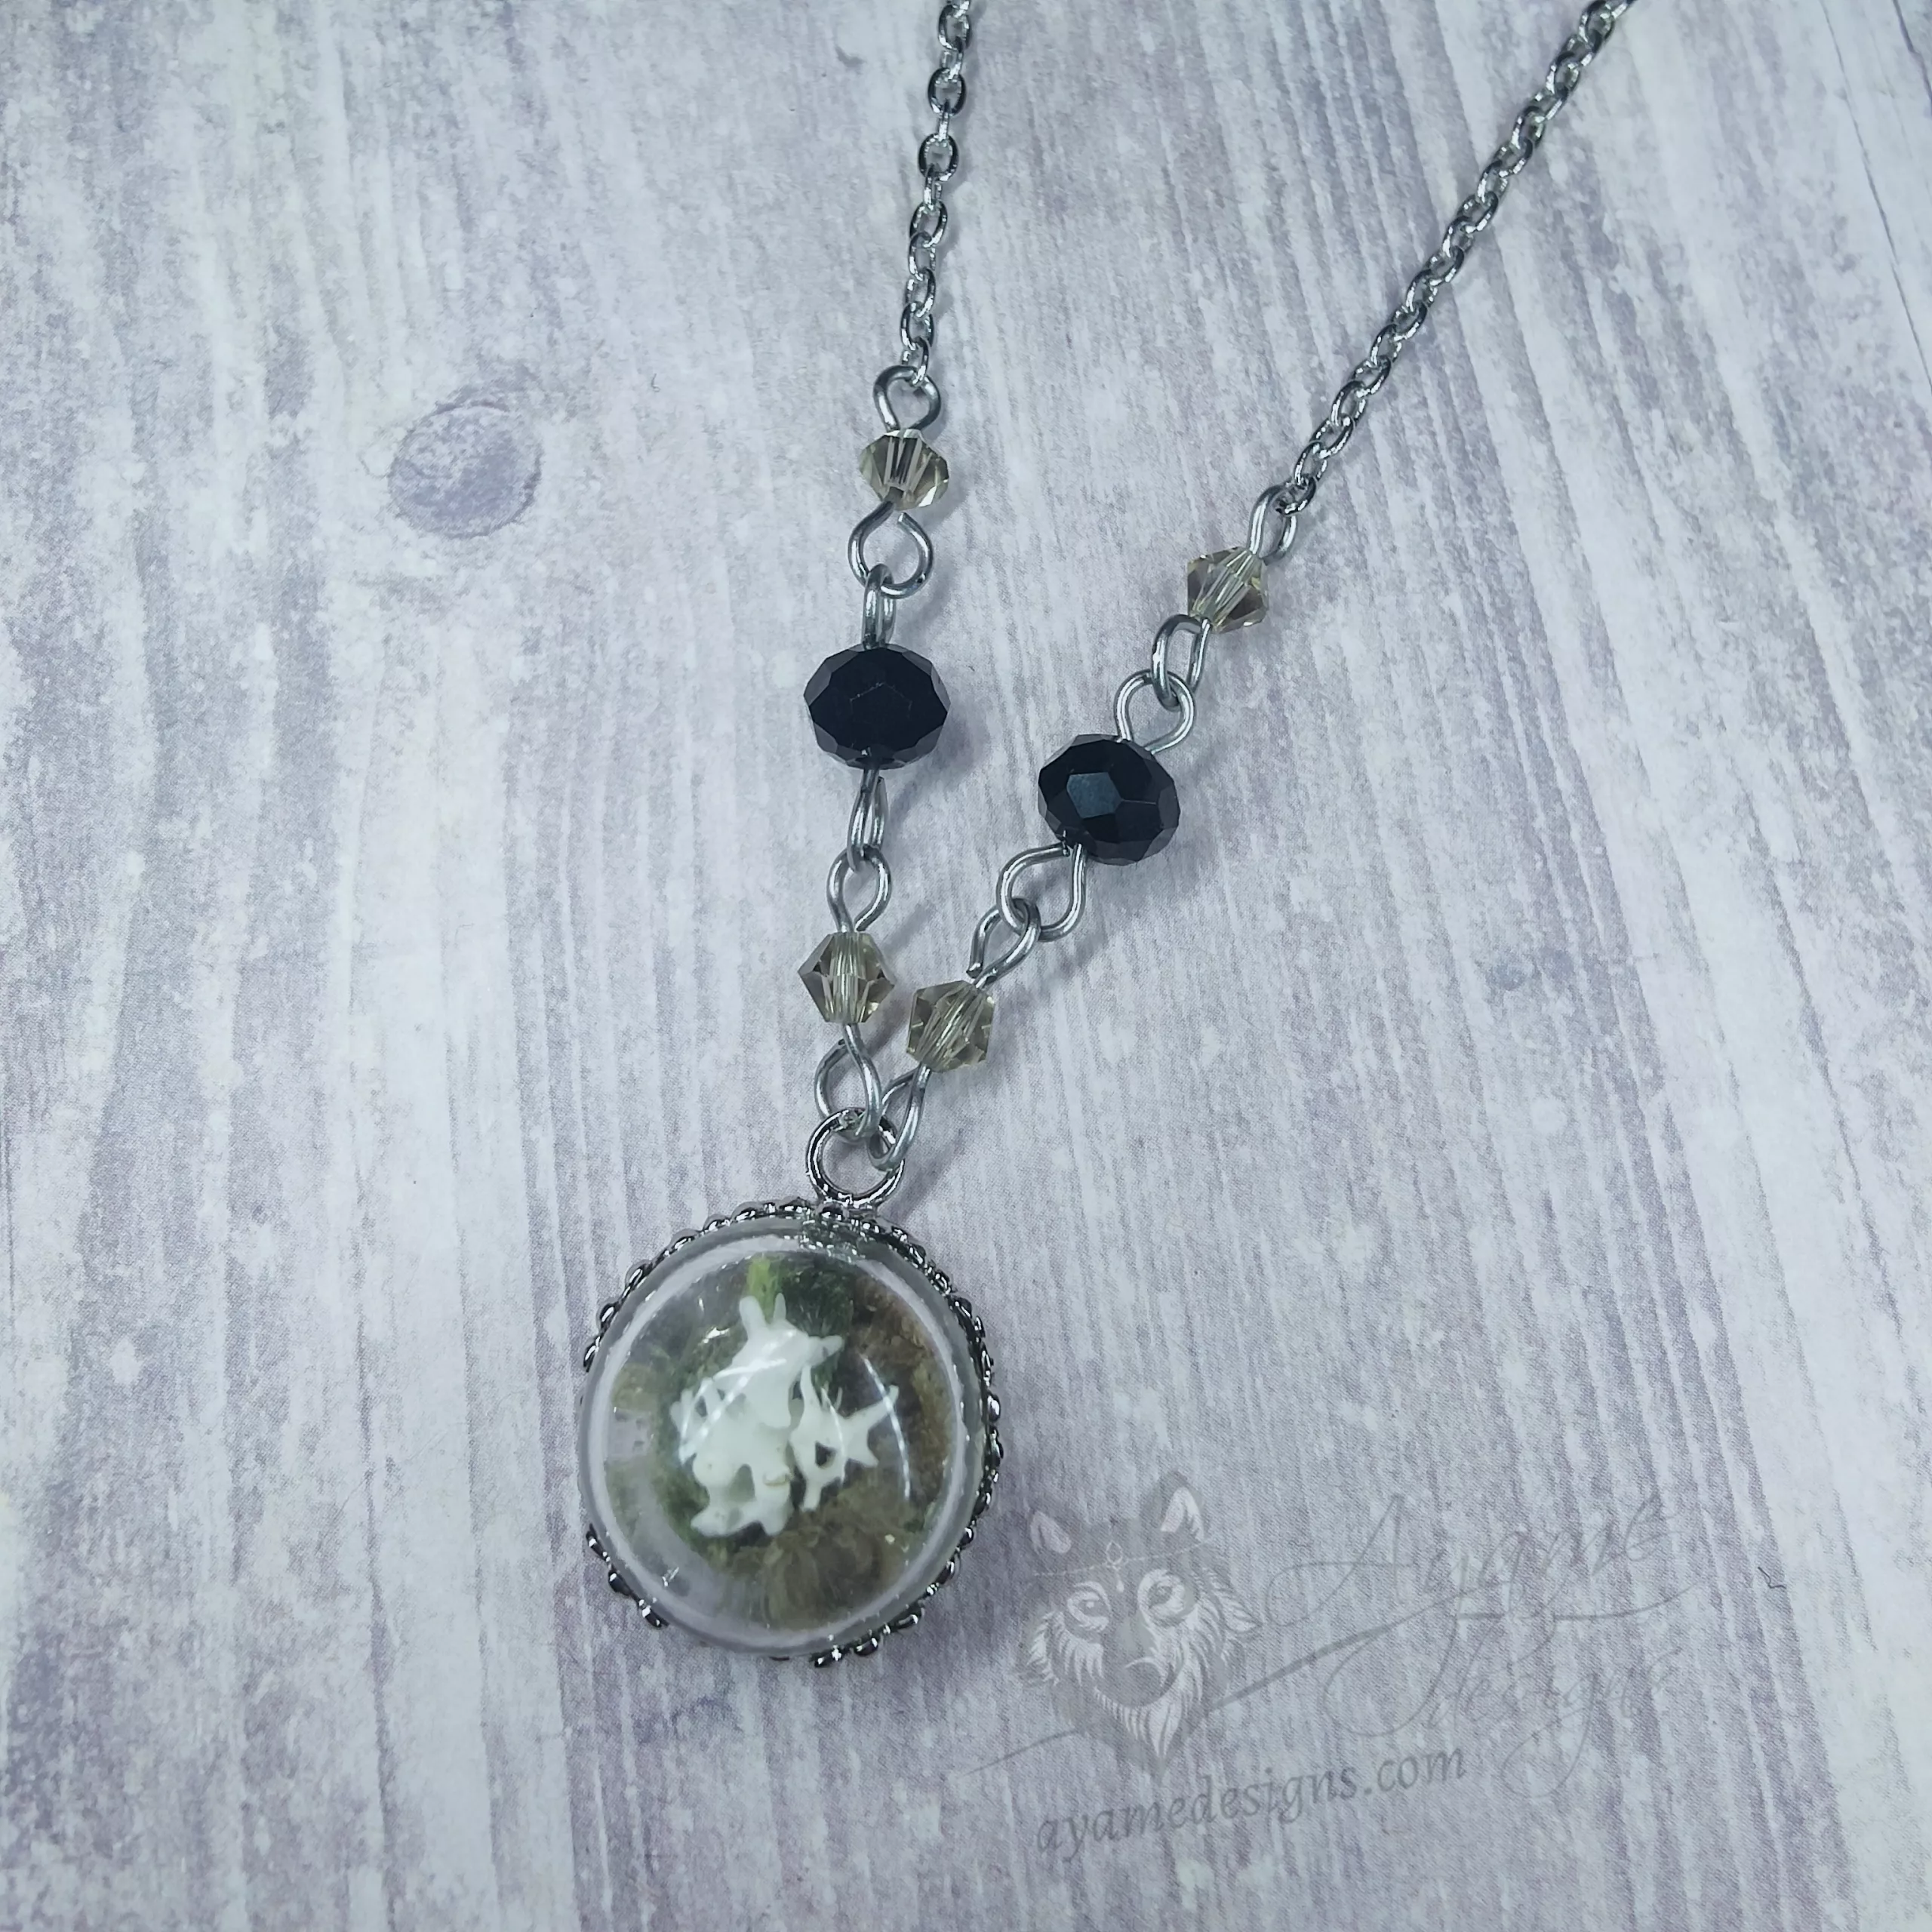 Glass dome necklace with ethically sourced snake vertebrae and moss, grey and black Austrian crystal beads and stainless steel chain